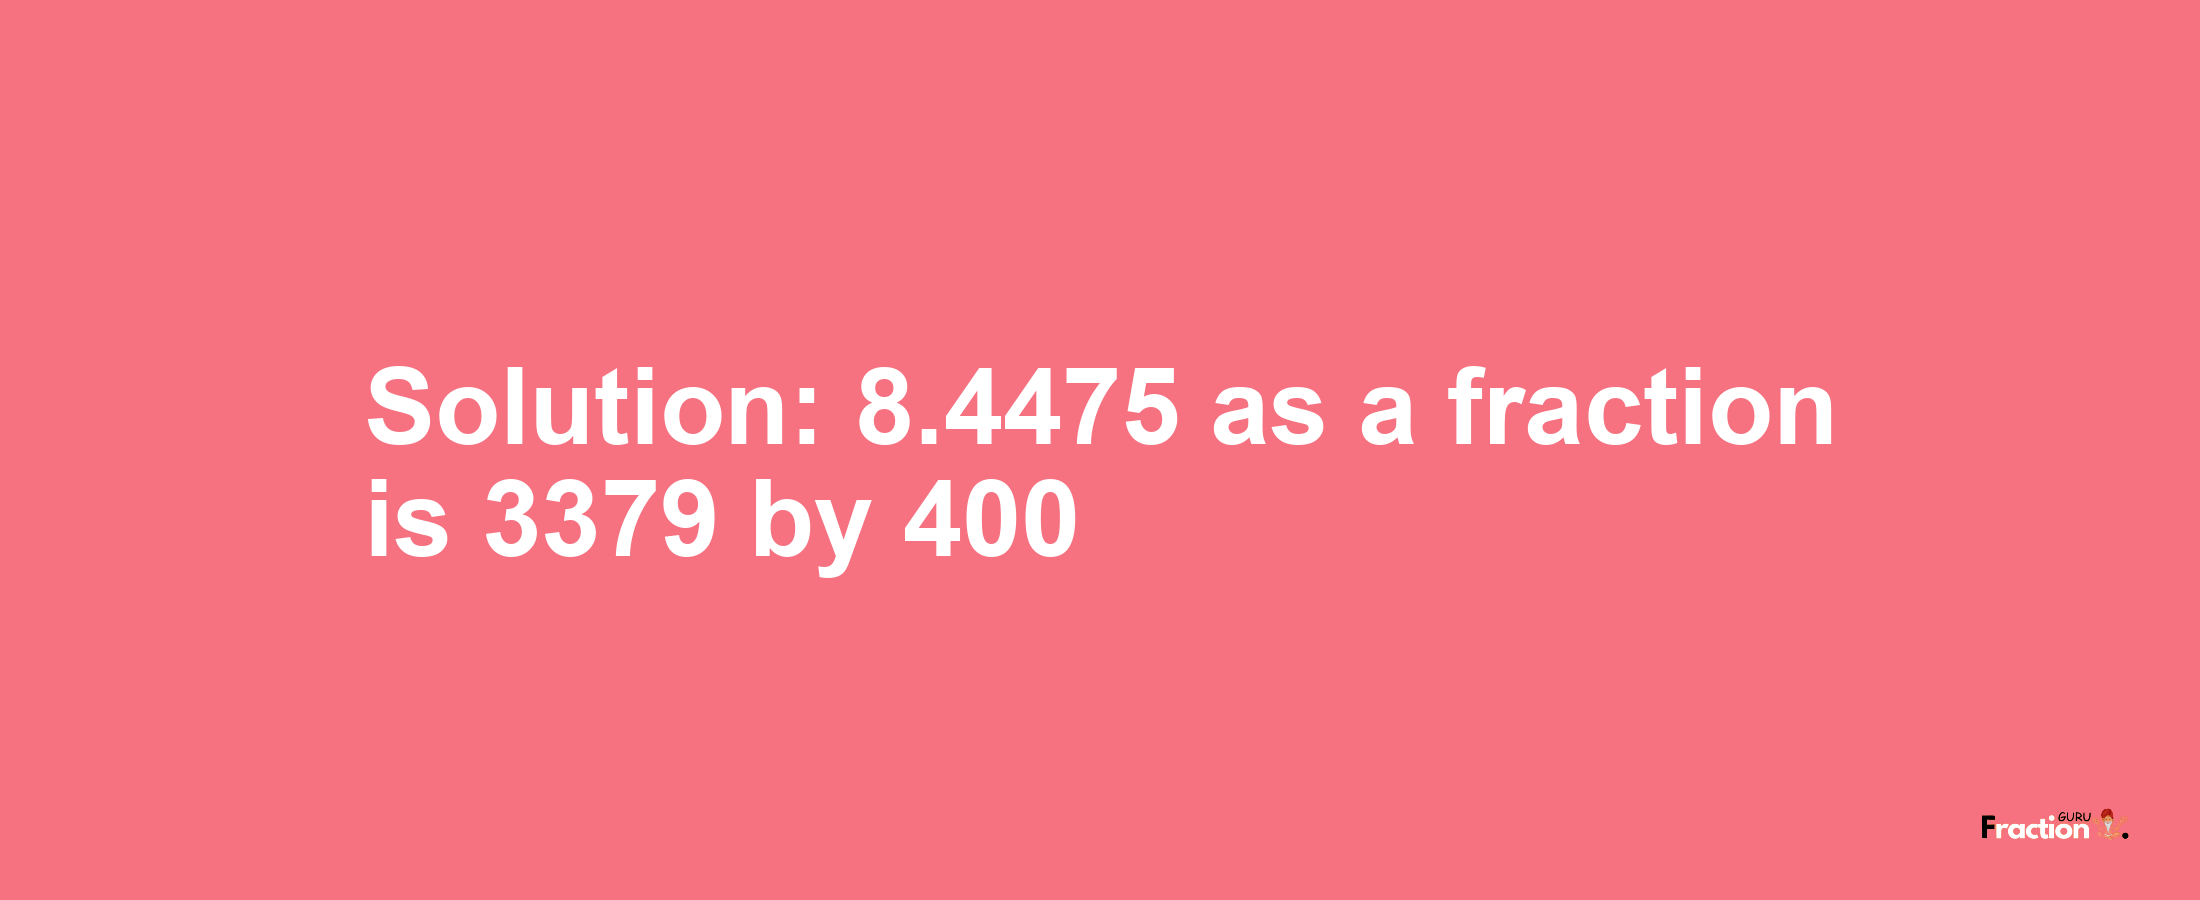 Solution:8.4475 as a fraction is 3379/400